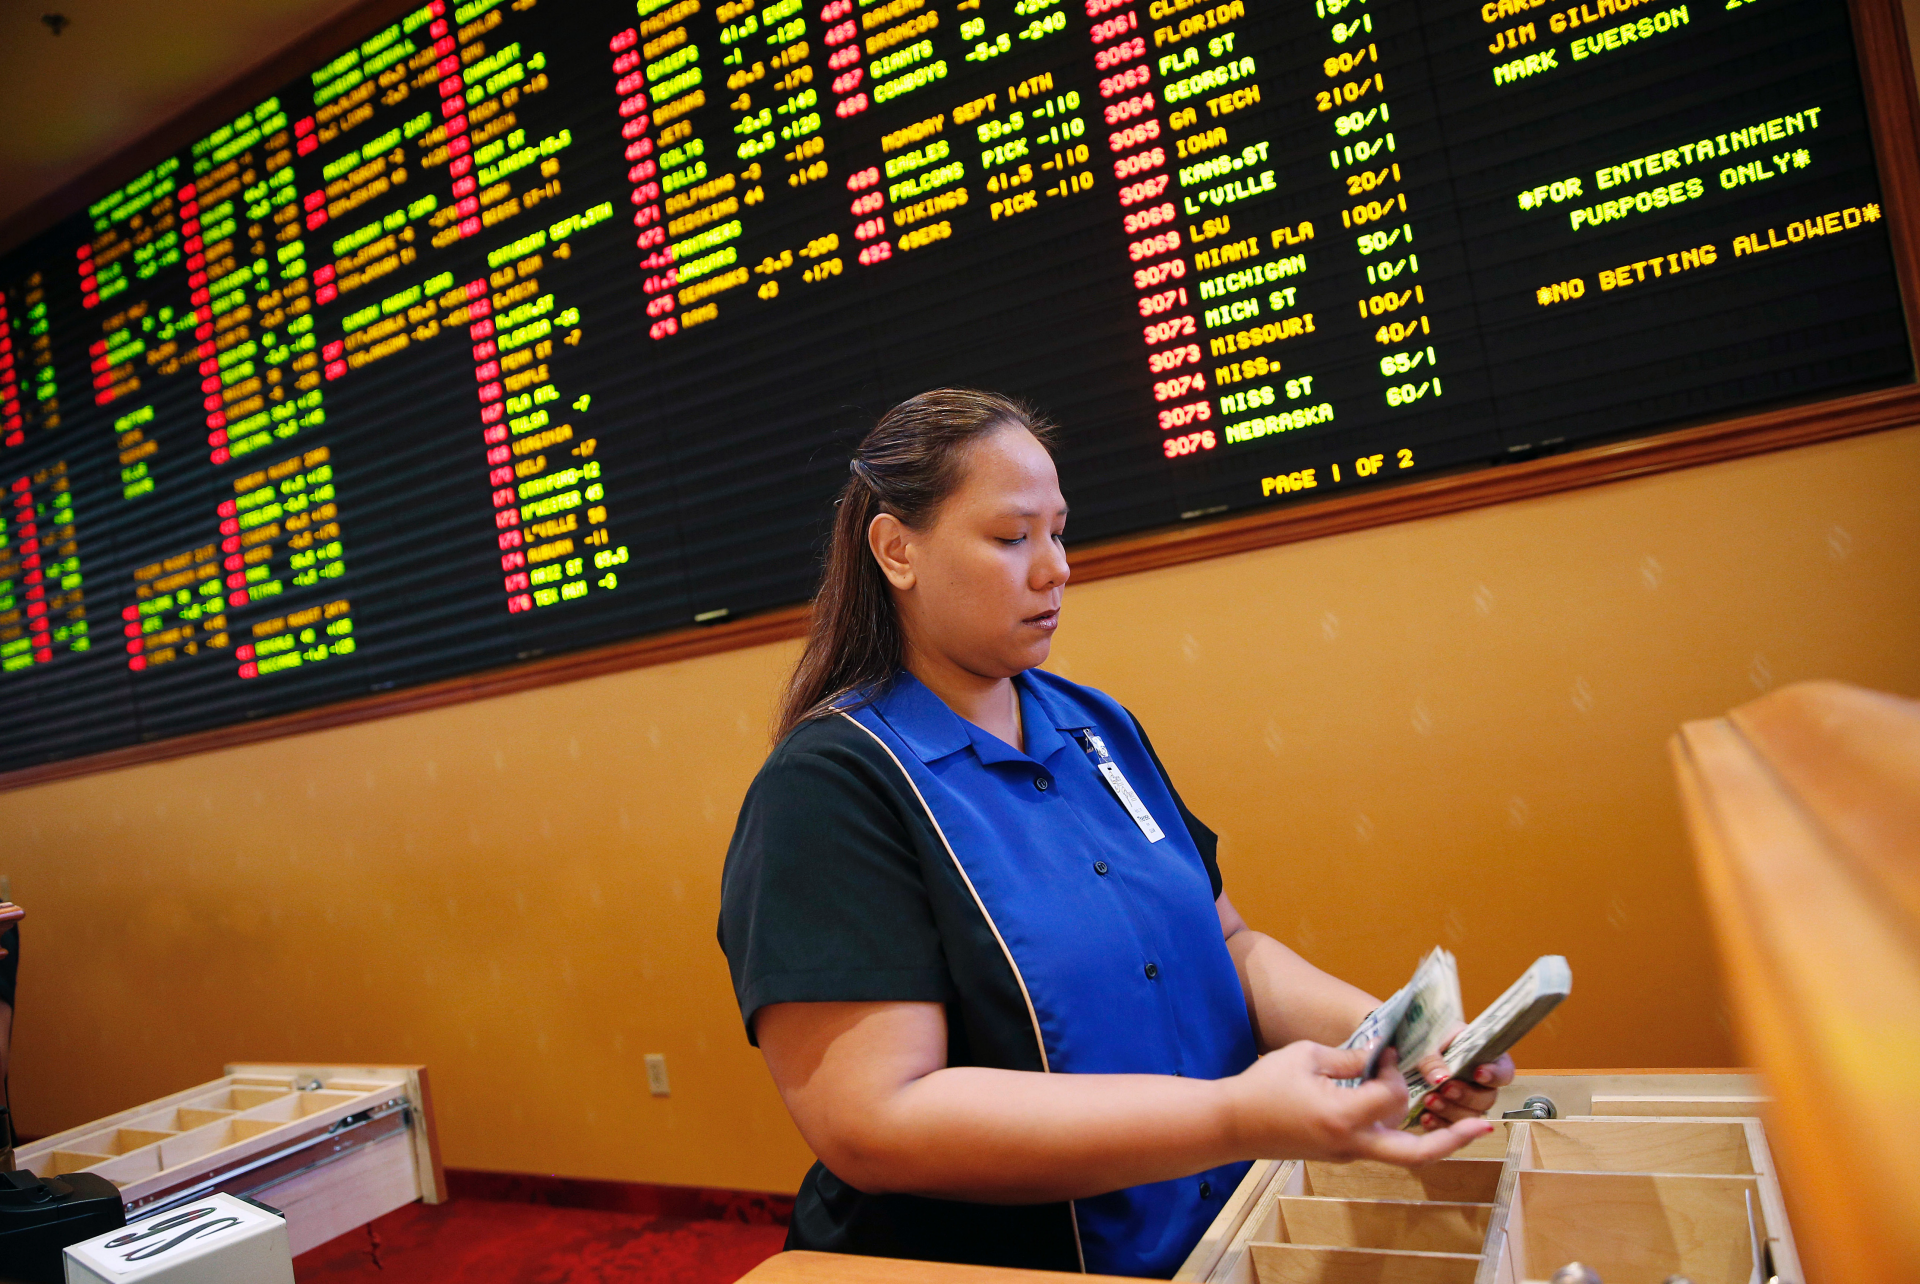 betting on sports should be legal